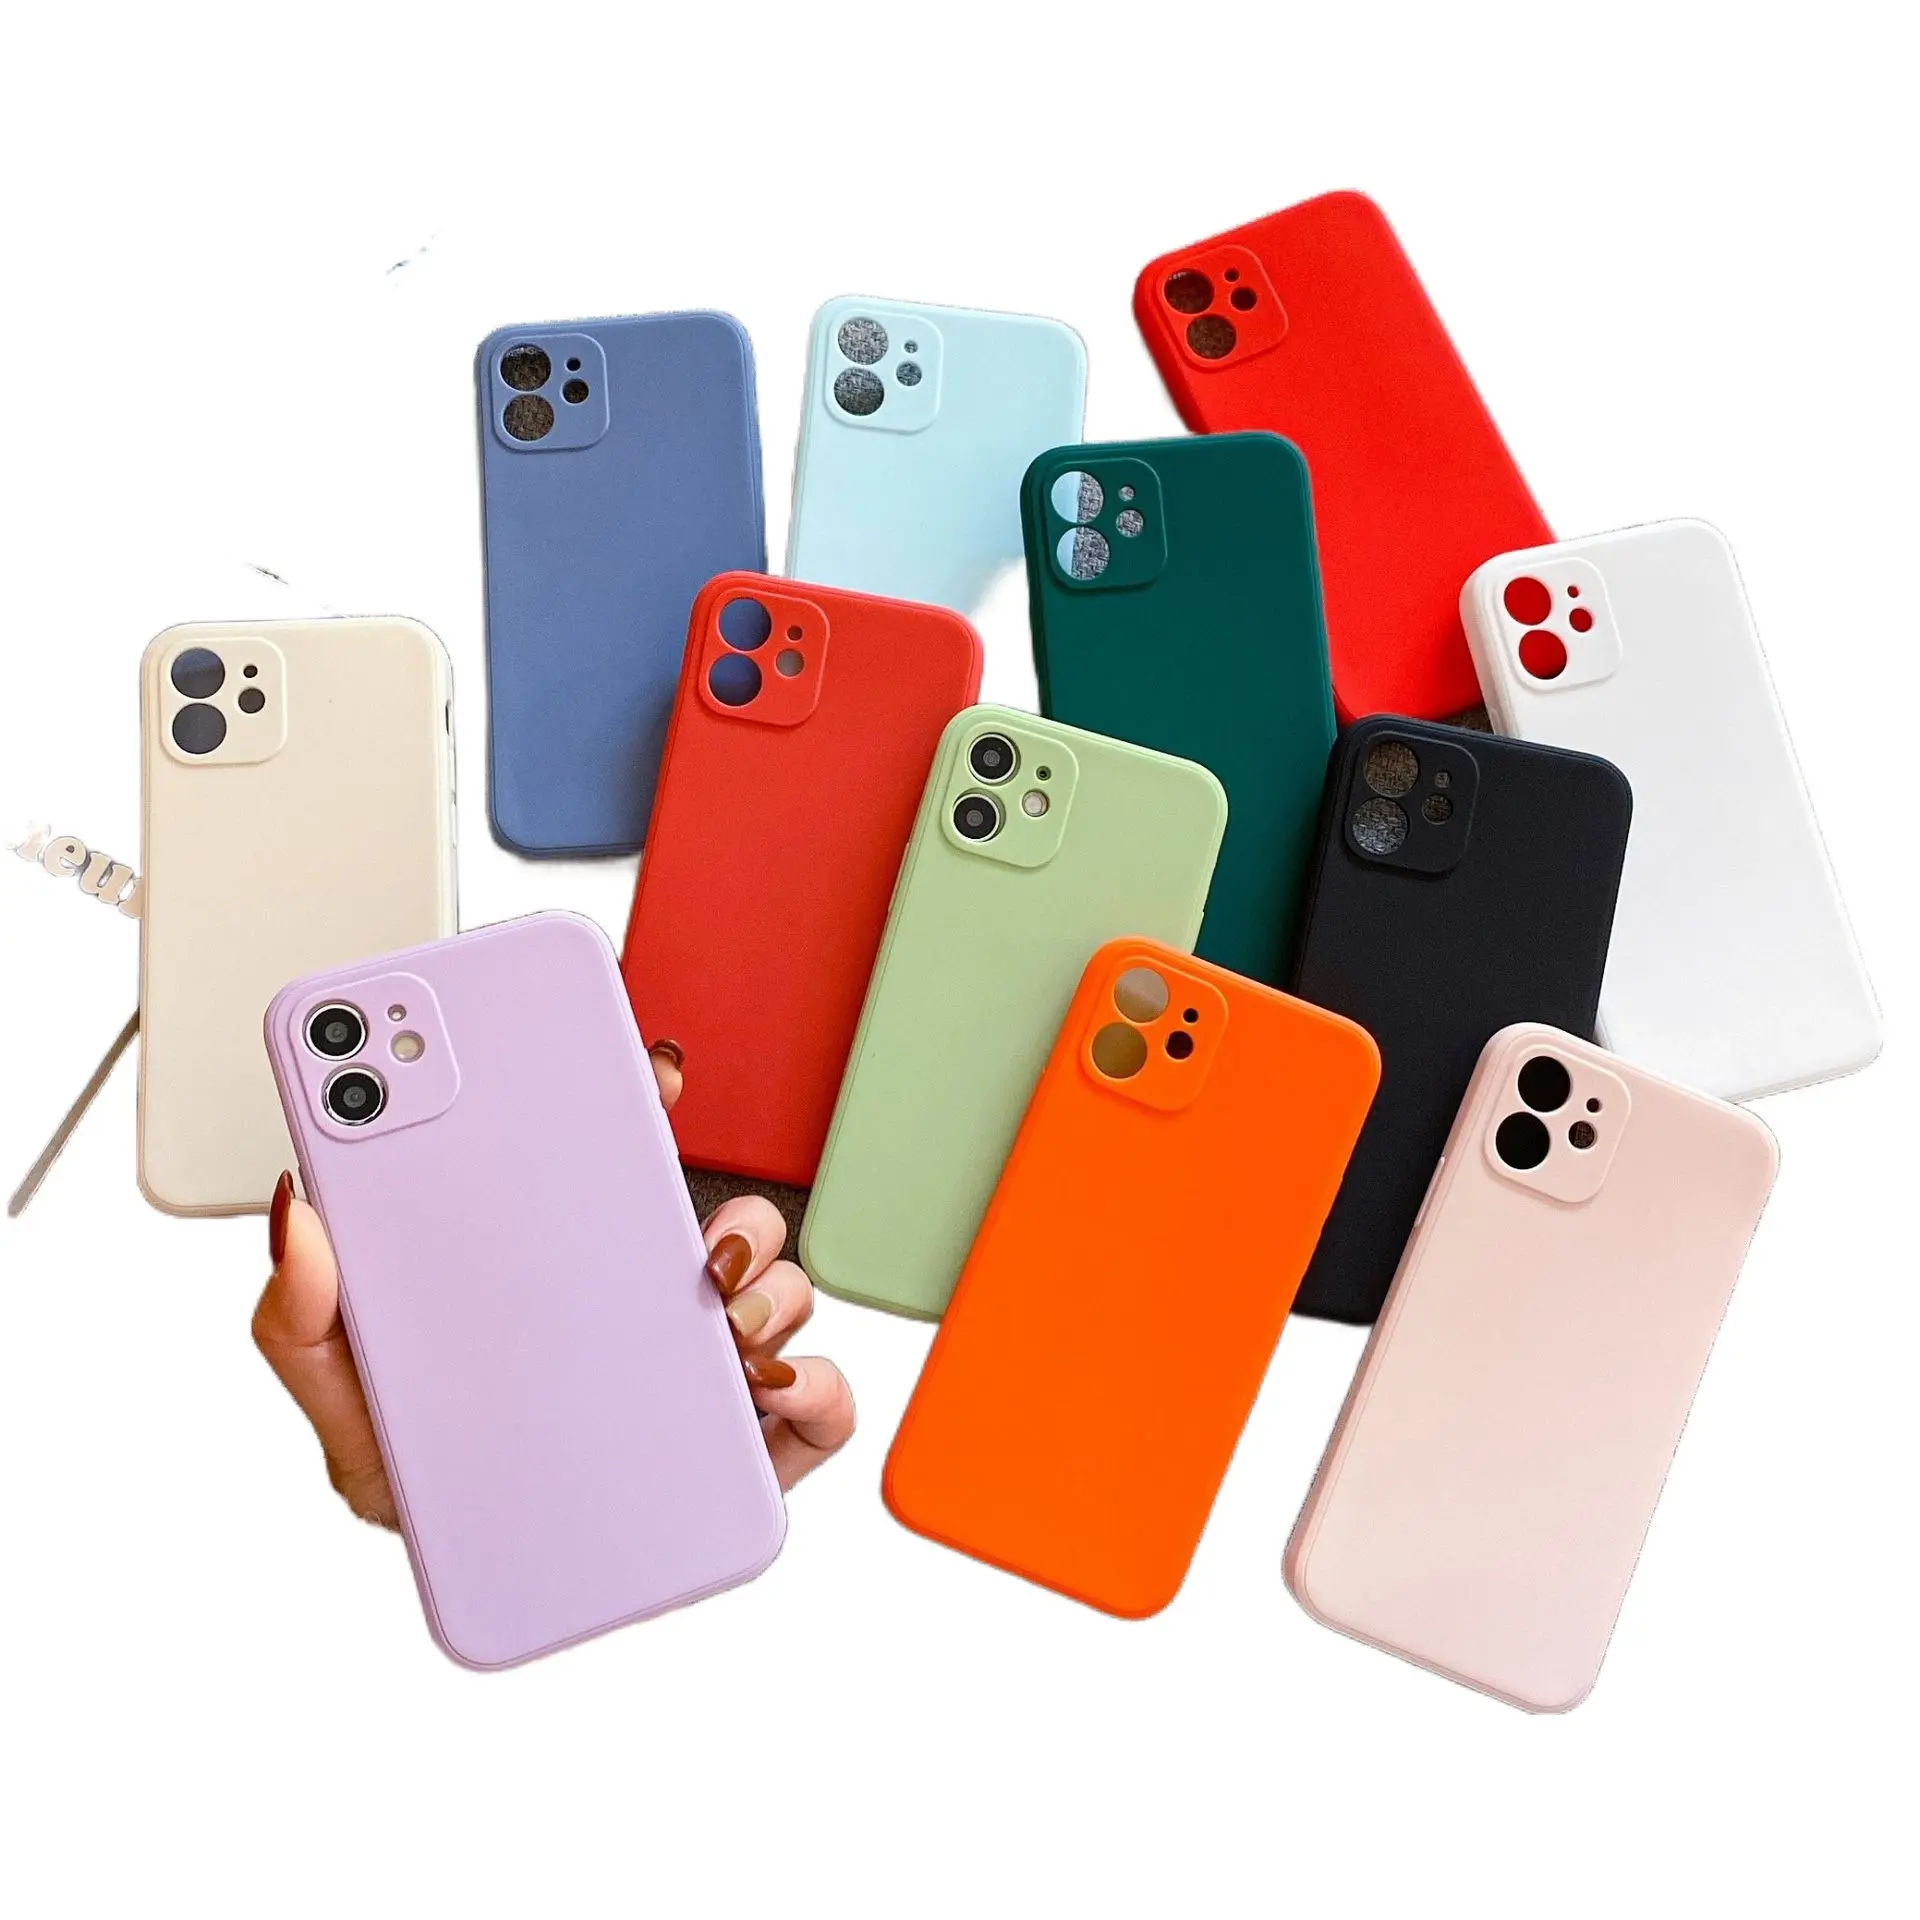 New Arrival hot Shockproof Soft TPU phone case pure black phone cover for iPhone 12 13 11 14 pro max